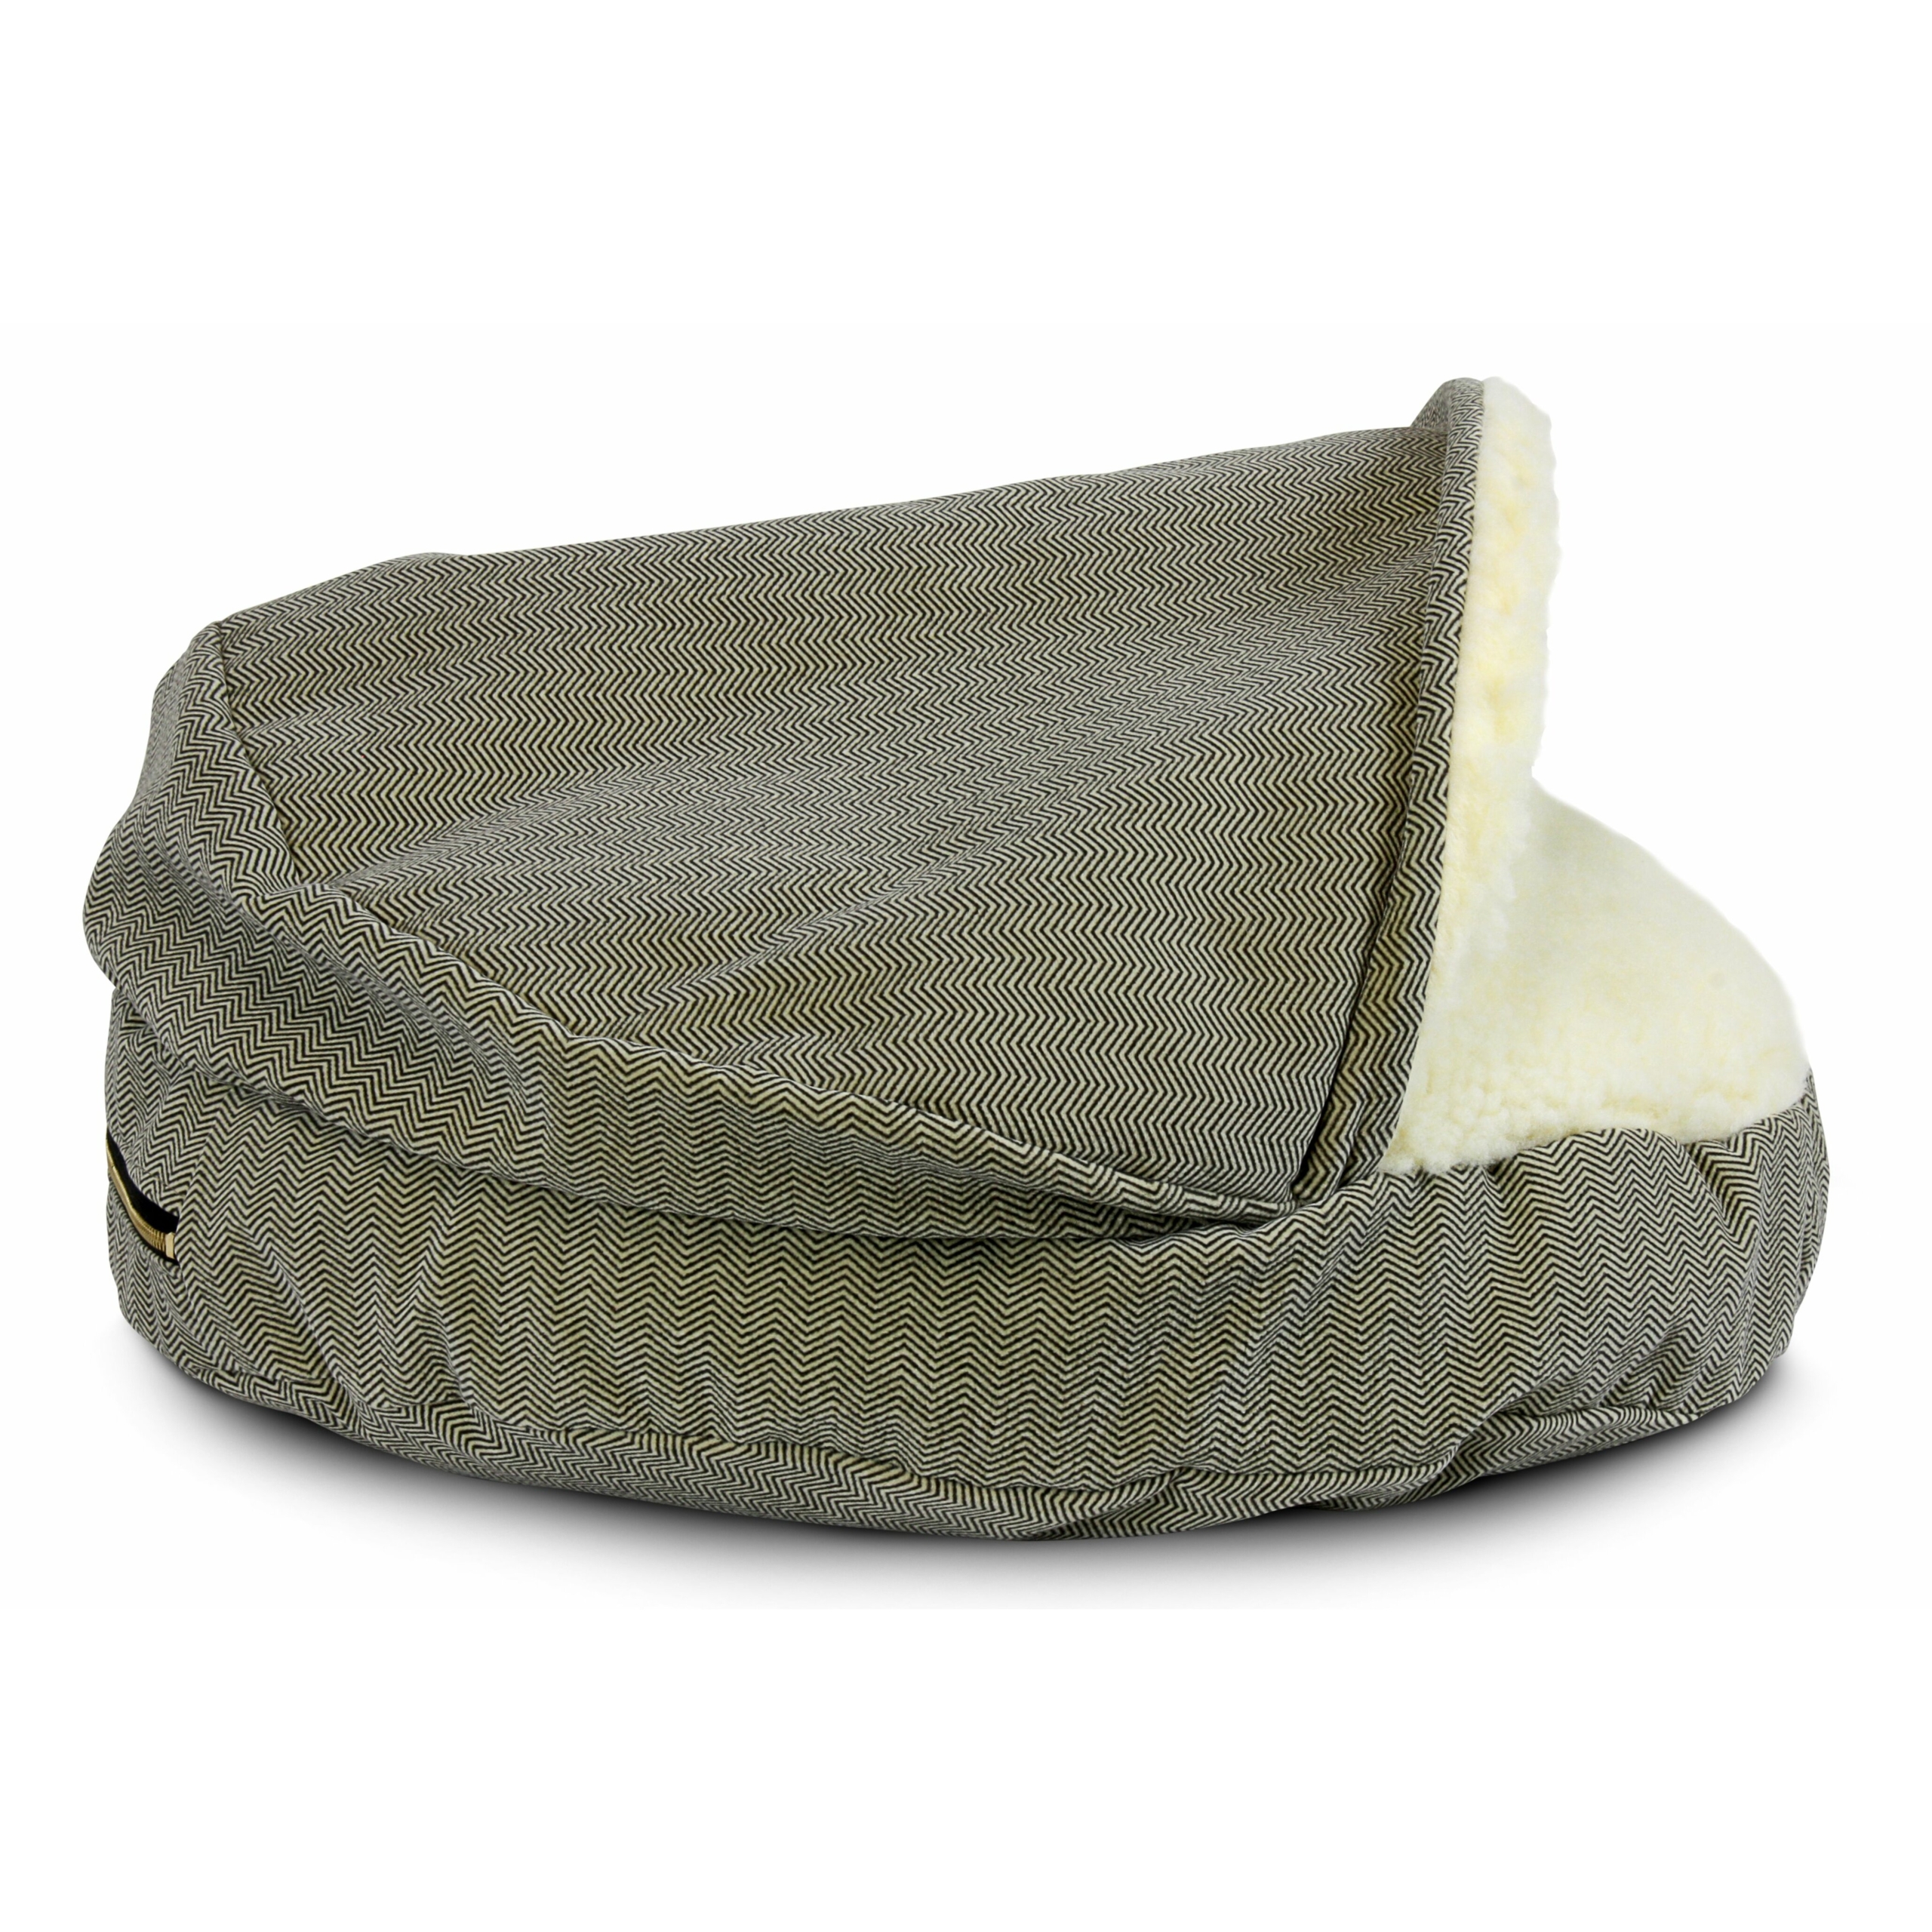 Snoozer Pet Products Cozy Cave Luxury Hooded Dog Bed